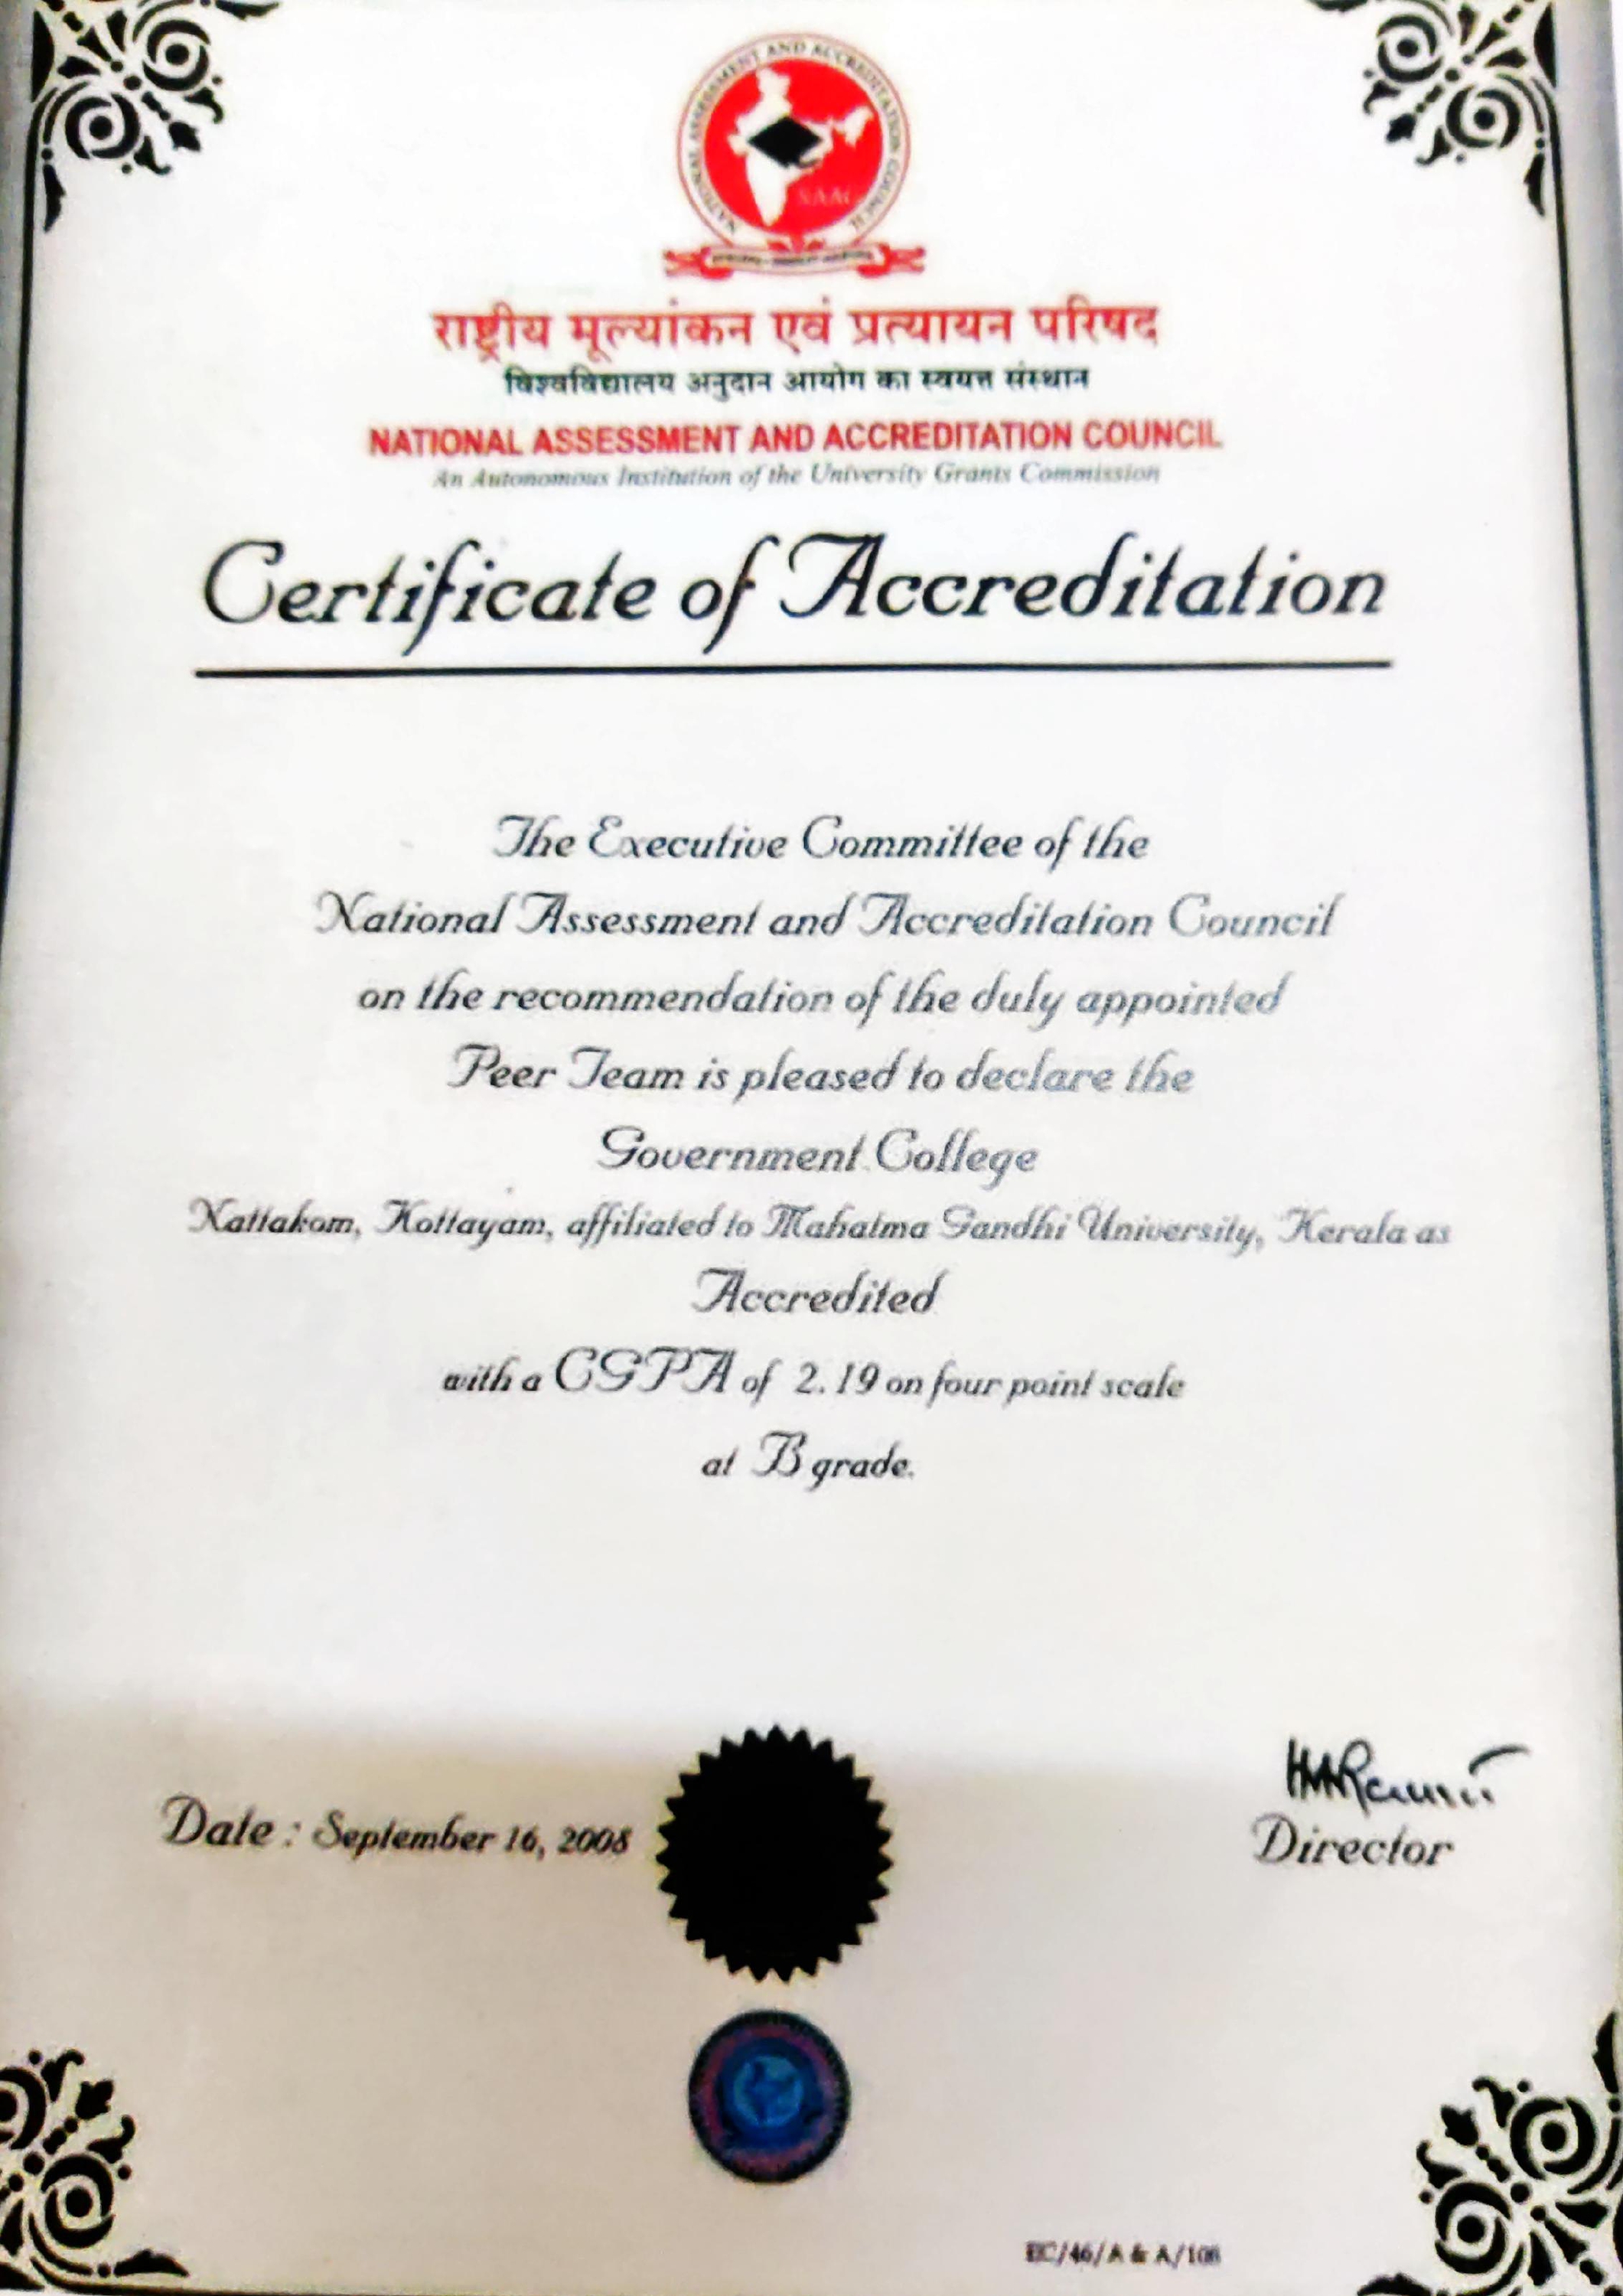 NAAC certificate of accreditation 16.09.08